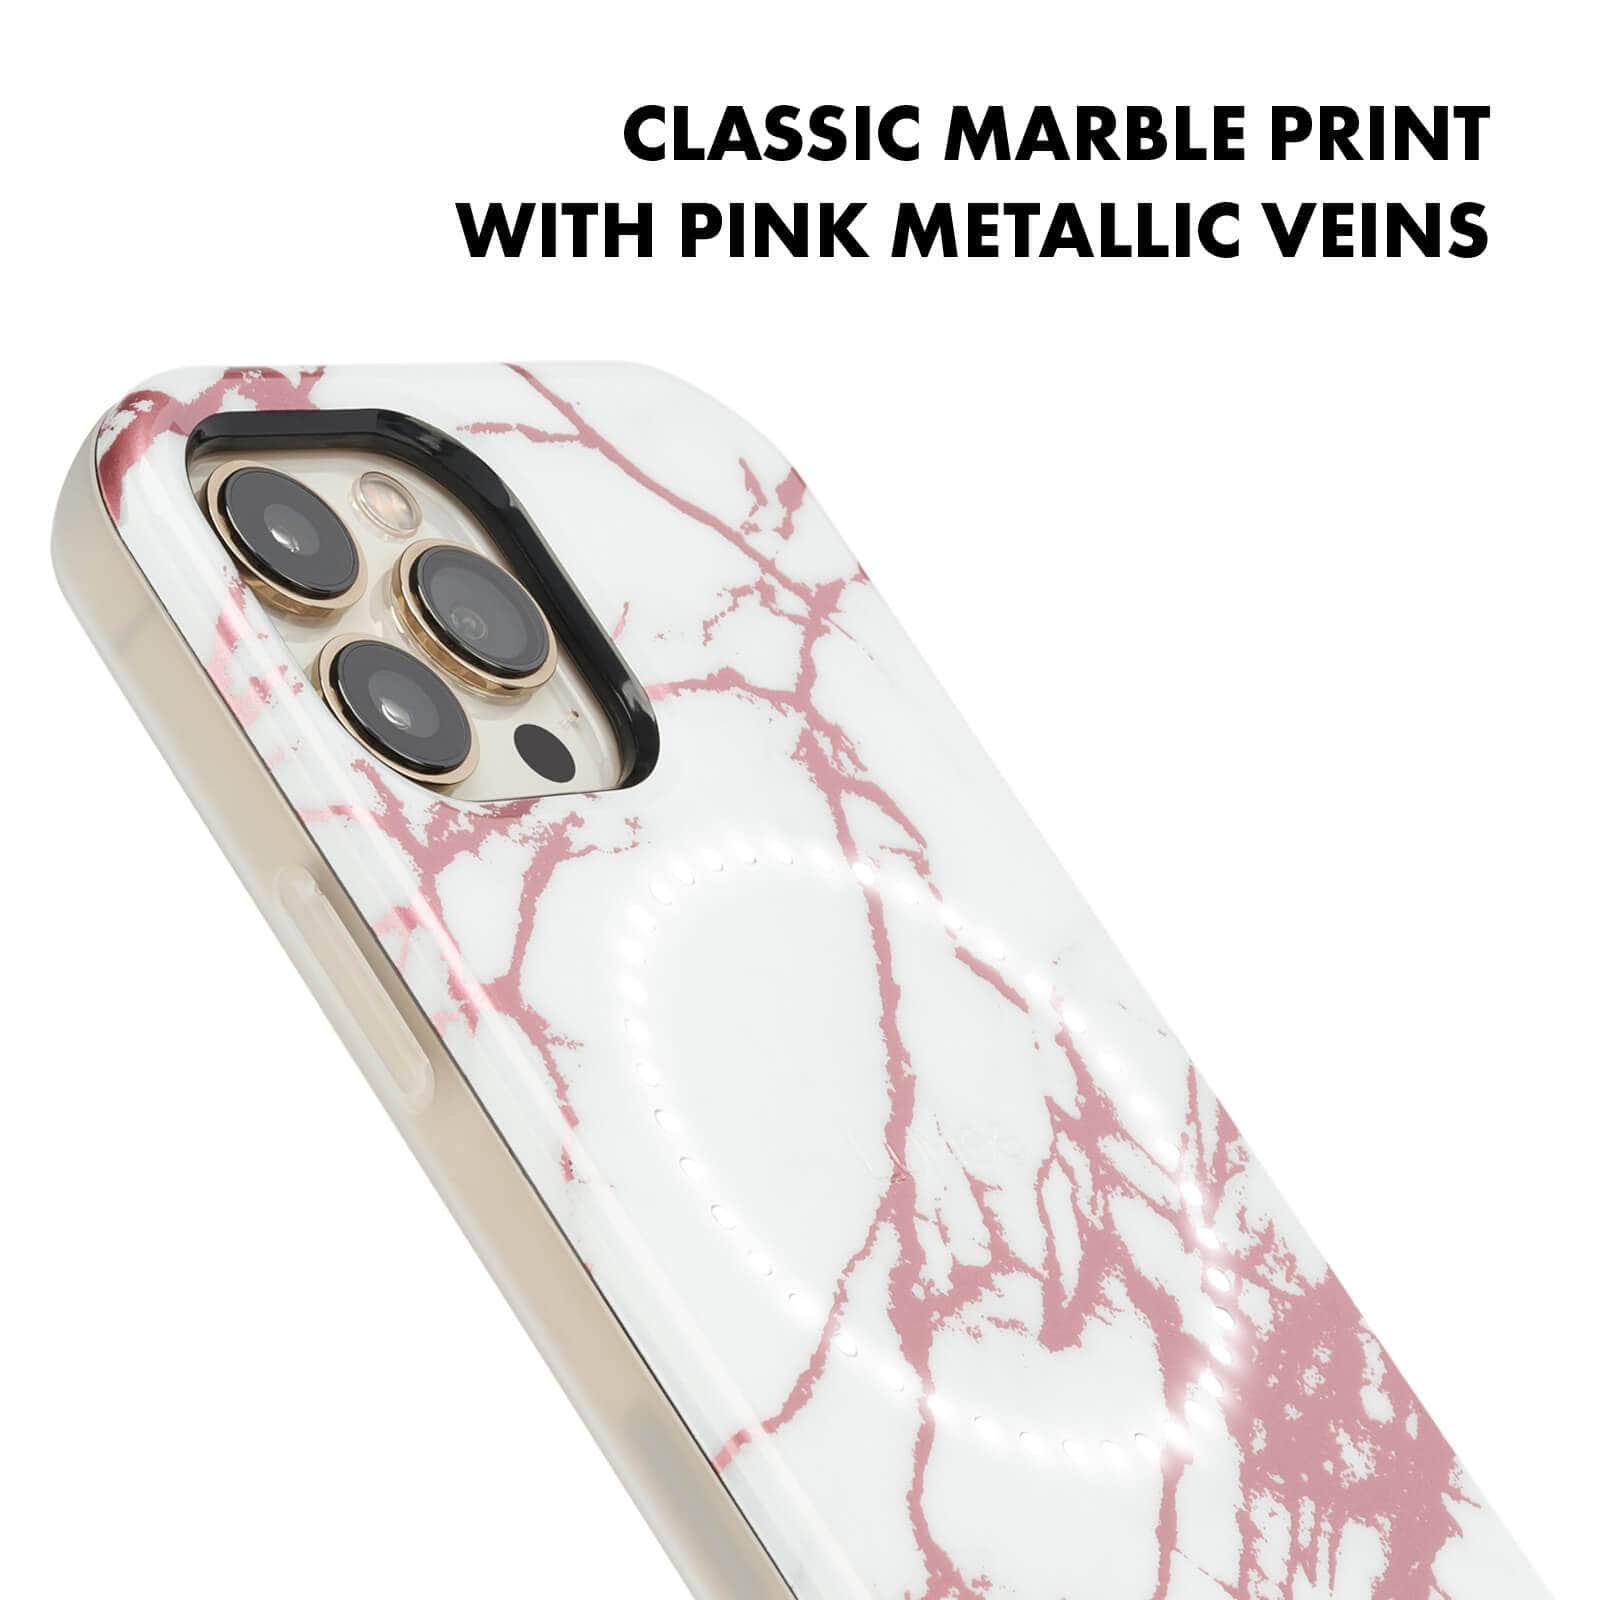 CLASSIC MARBLE PRINT WITH PINK METALLIC VEINS color::Rose Metallic White Marble